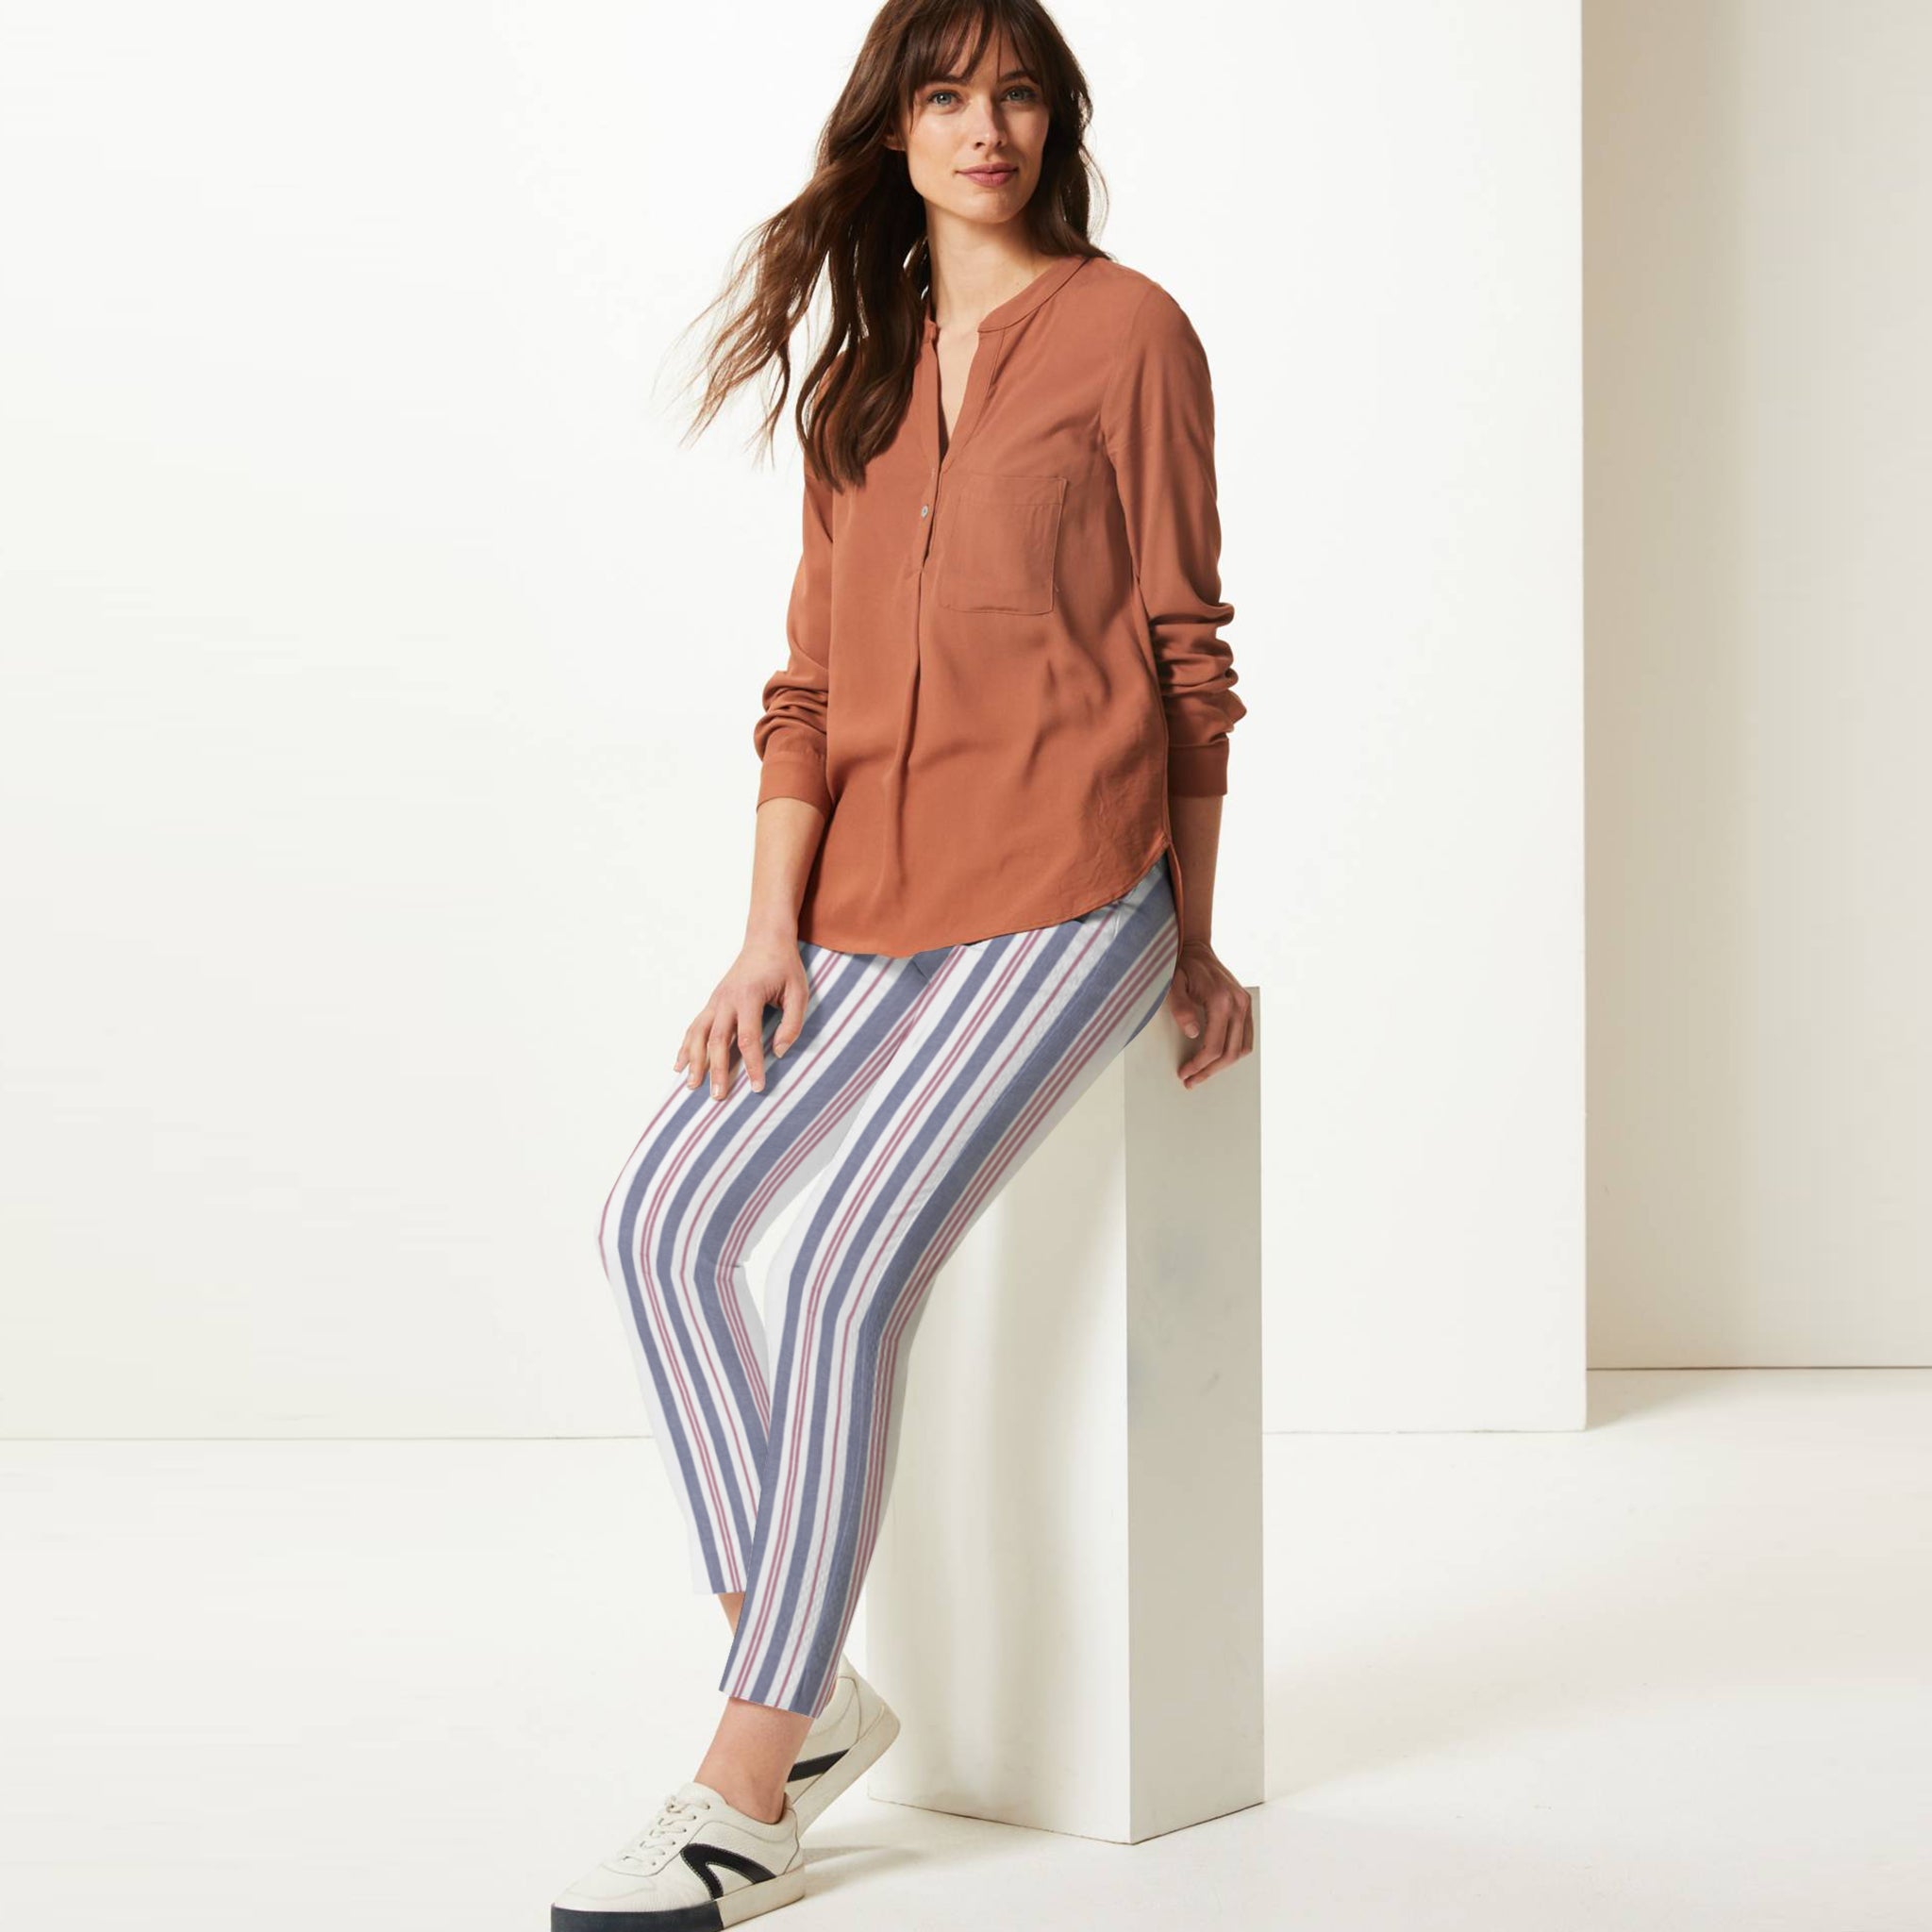 ladies striped trousers